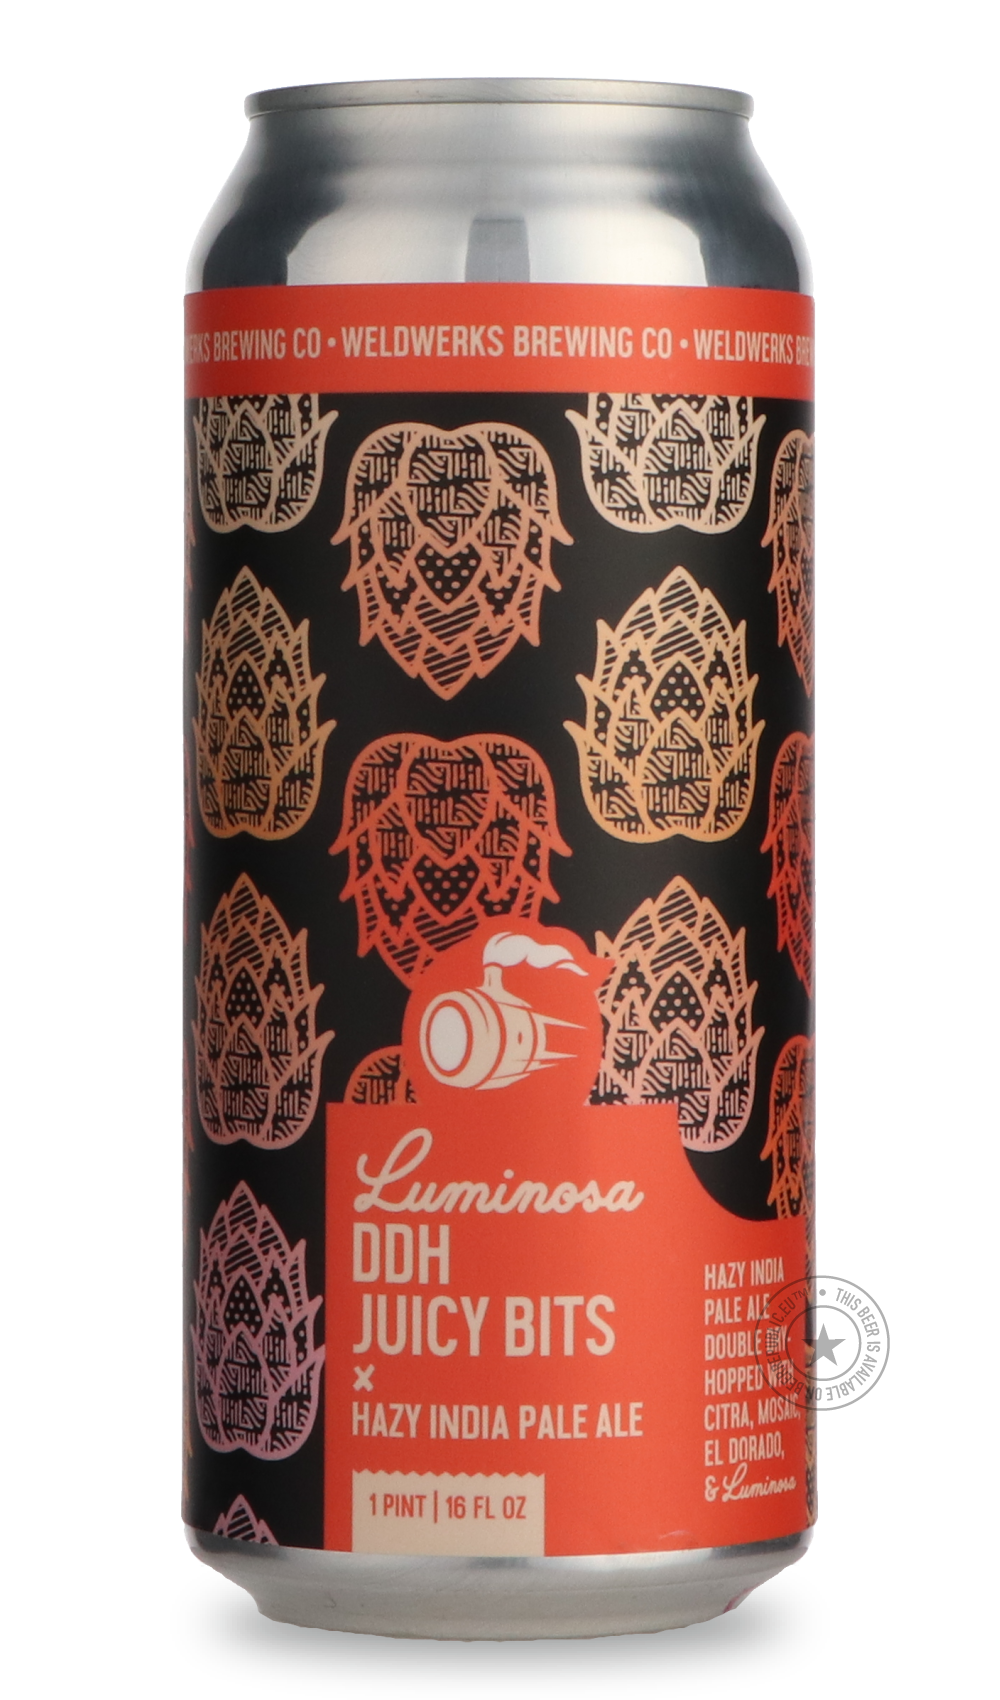 -WeldWerks- Luminosa DDH Juicy Bits-IPA- Only @ Beer Republic - The best online beer store for American & Canadian craft beer - Buy beer online from the USA and Canada - Bier online kopen - Amerikaans bier kopen - Craft beer store - Craft beer kopen - Amerikanisch bier kaufen - Bier online kaufen - Acheter biere online - IPA - Stout - Porter - New England IPA - Hazy IPA - Imperial Stout - Barrel Aged - Barrel Aged Imperial Stout - Brown - Dark beer - Blond - Blonde - Pilsner - Lager - Wheat - Weizen - Amber